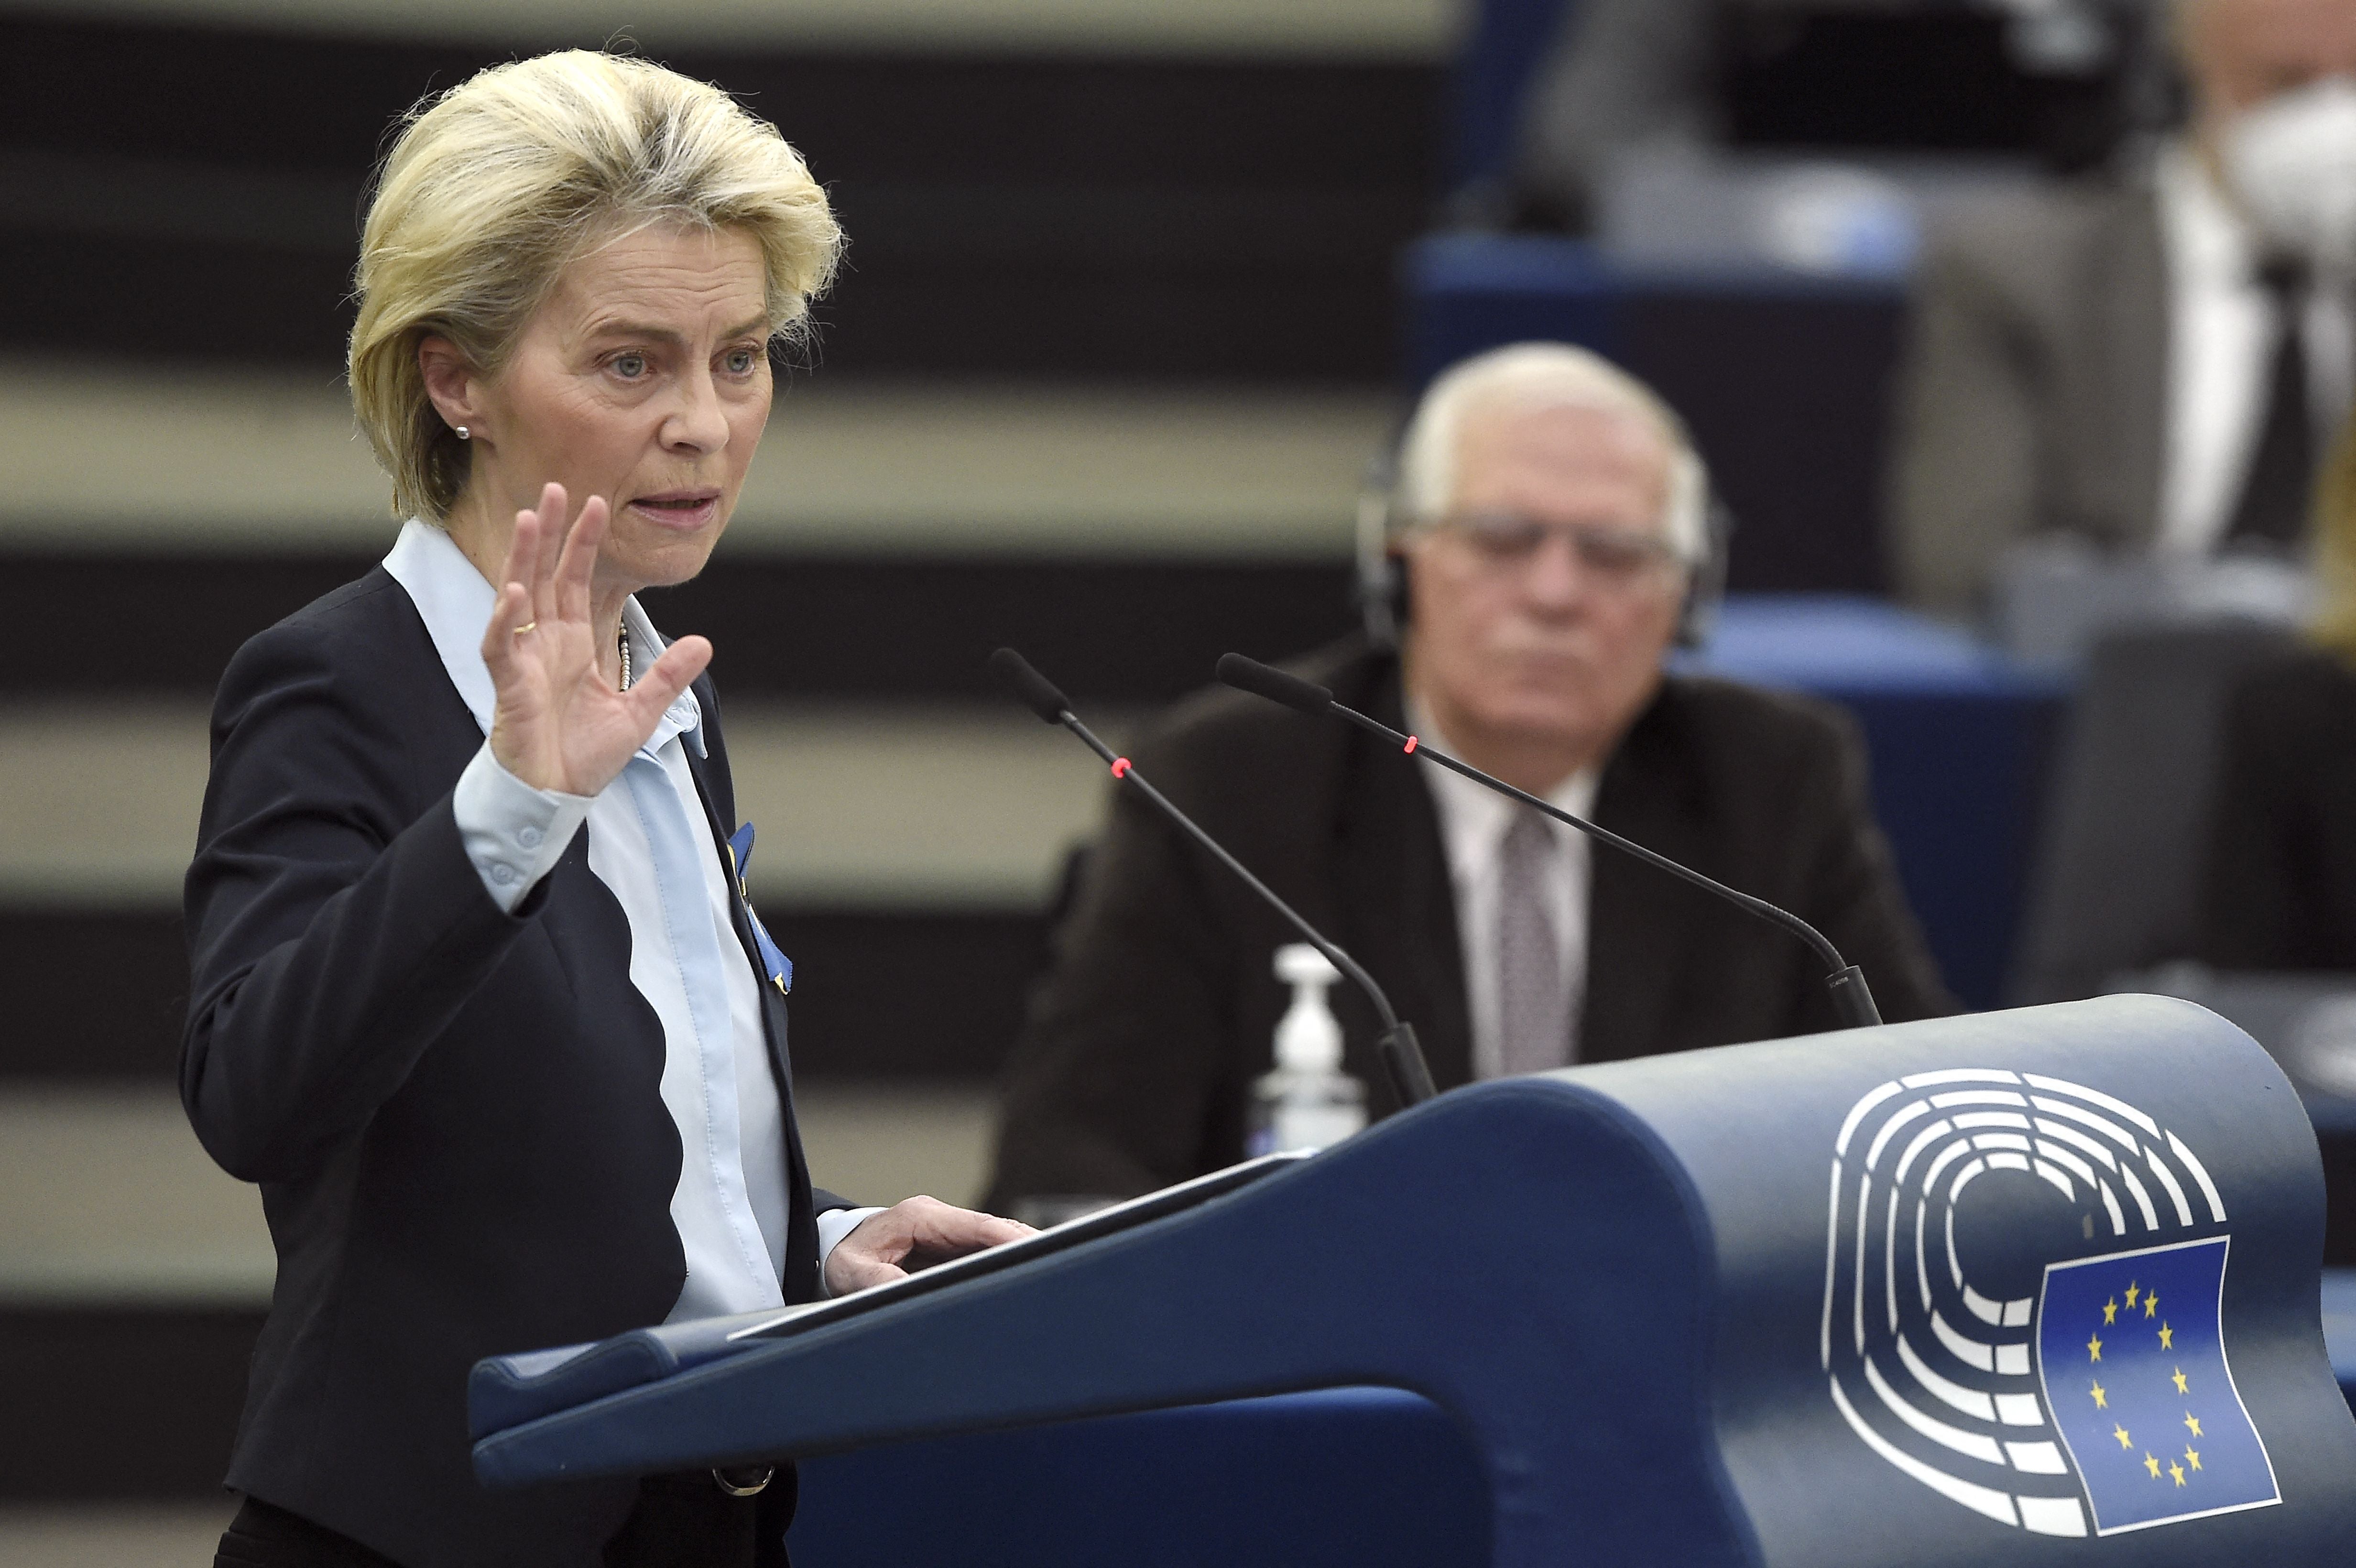 Von der Leyen gestures as she speaks during a debate on Russia’s invasion of Ukraine at a plenary session at the European parliament in Strasbourg, eastern France, on Wednesday